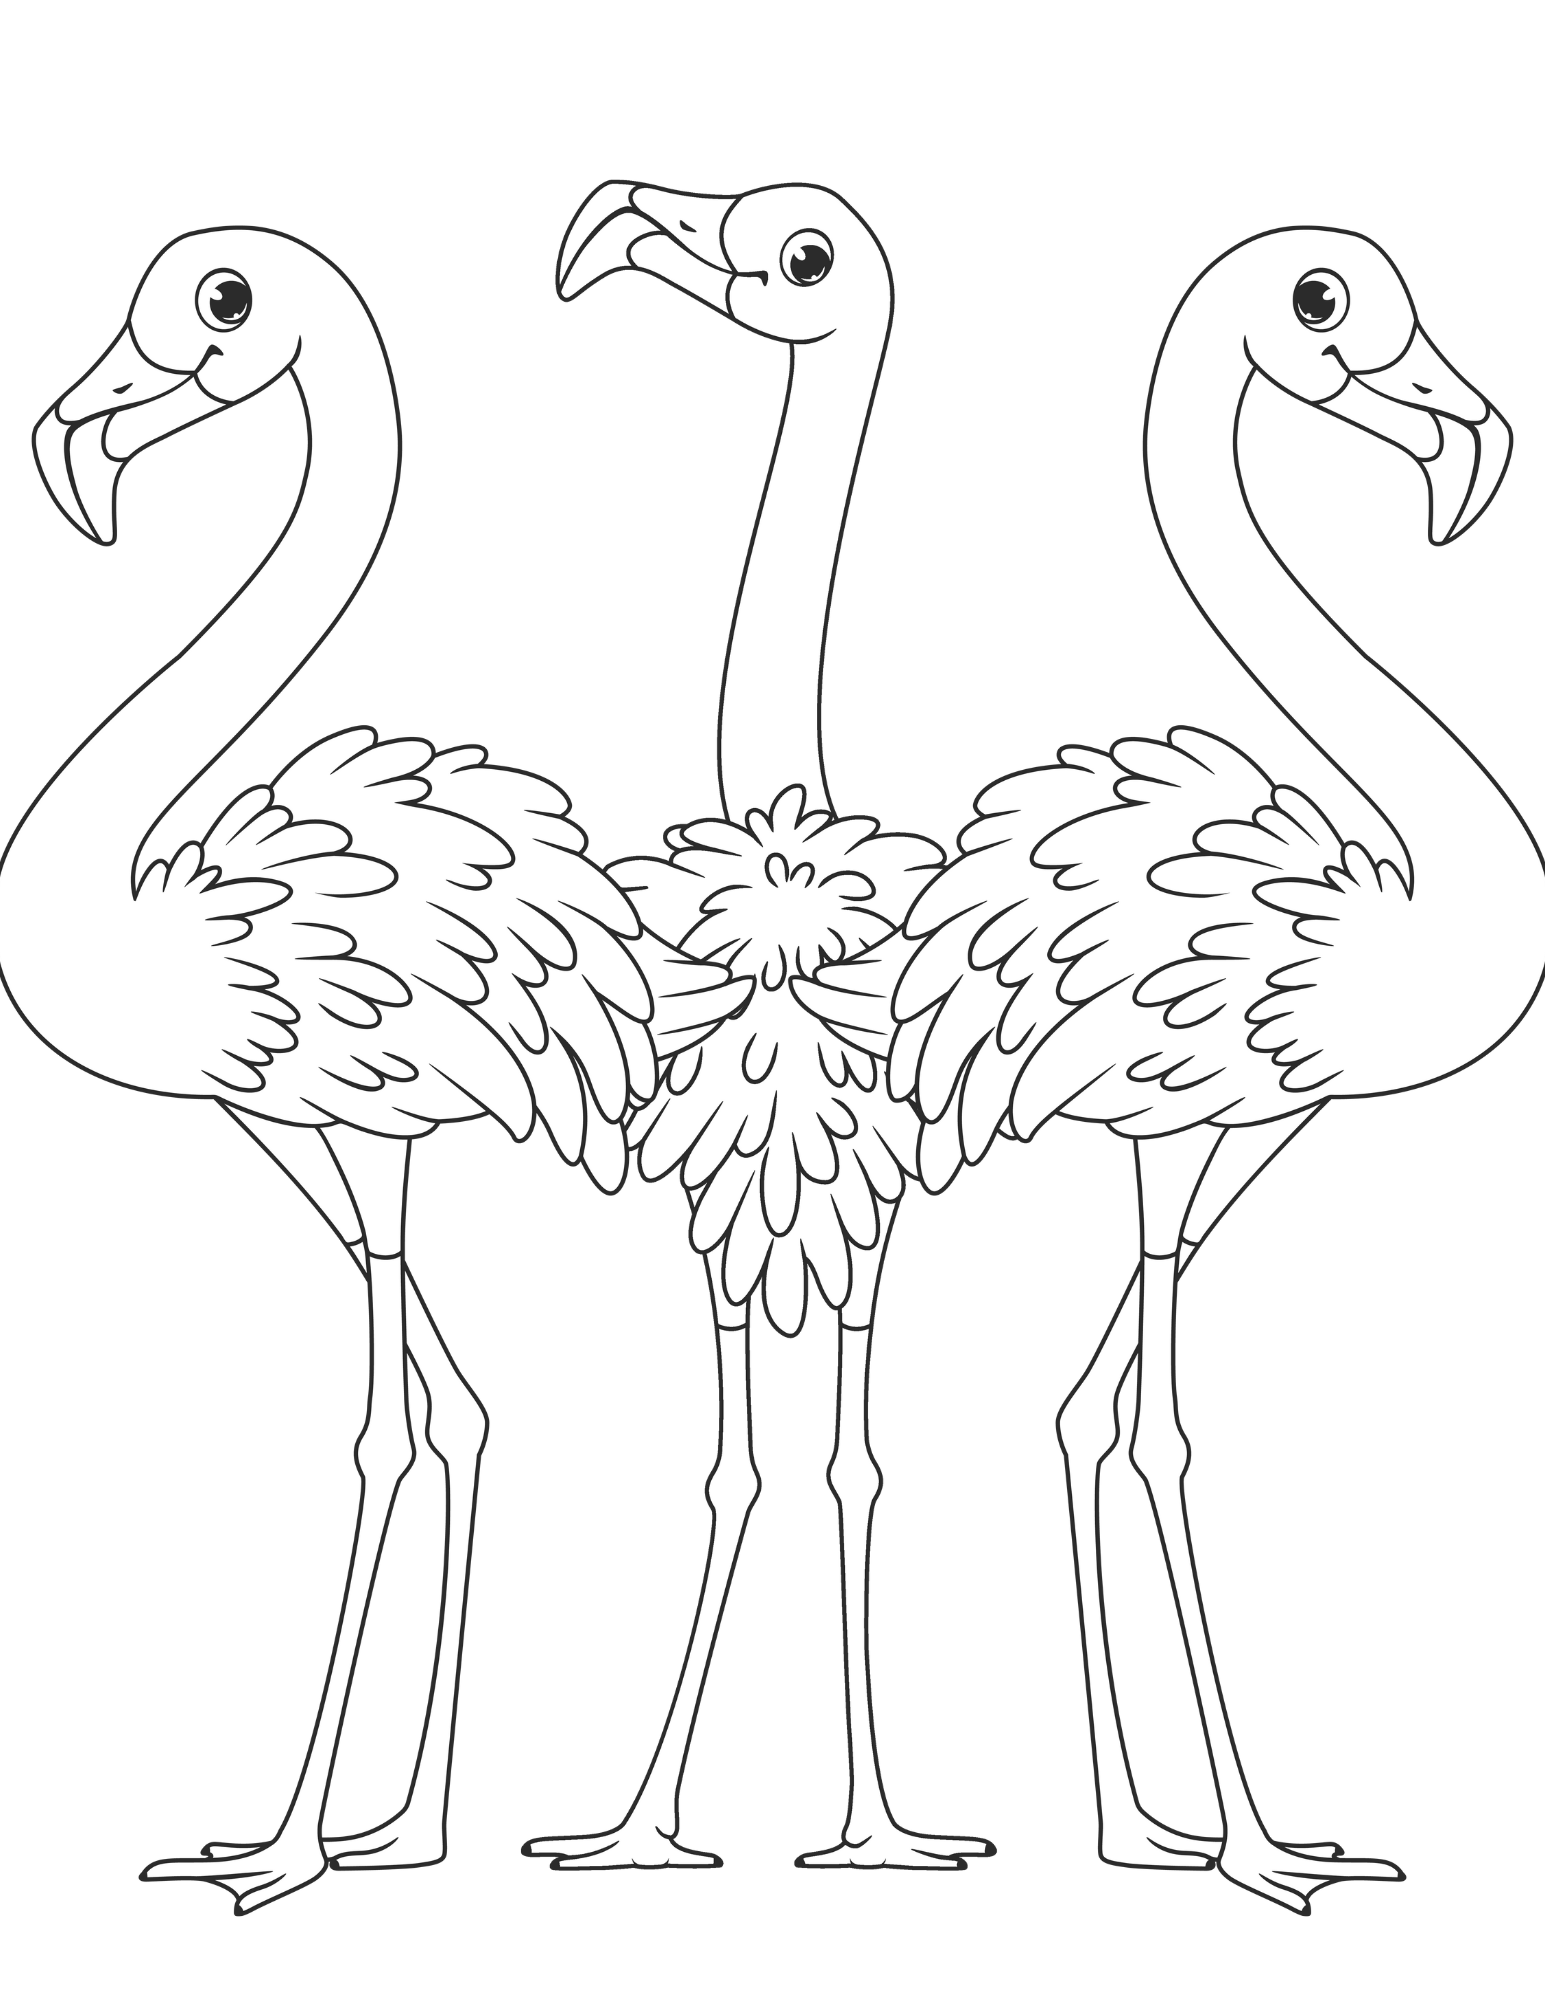 Fun flamingo facts and free flamingo coloring pages